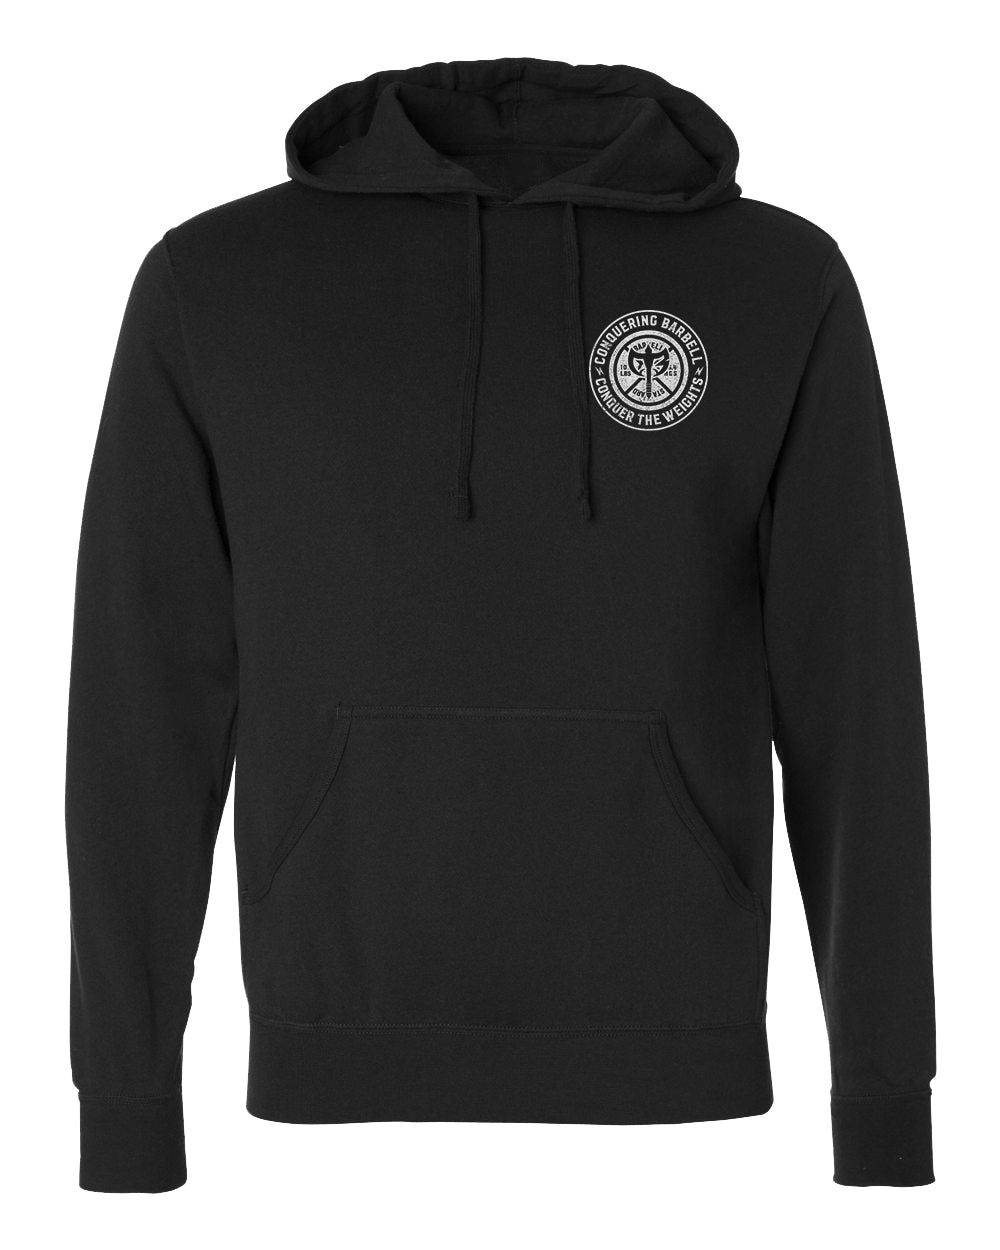 Squat Press Pull® Pullover Hoodie - Black O.G. Edition - Conquering Barbell